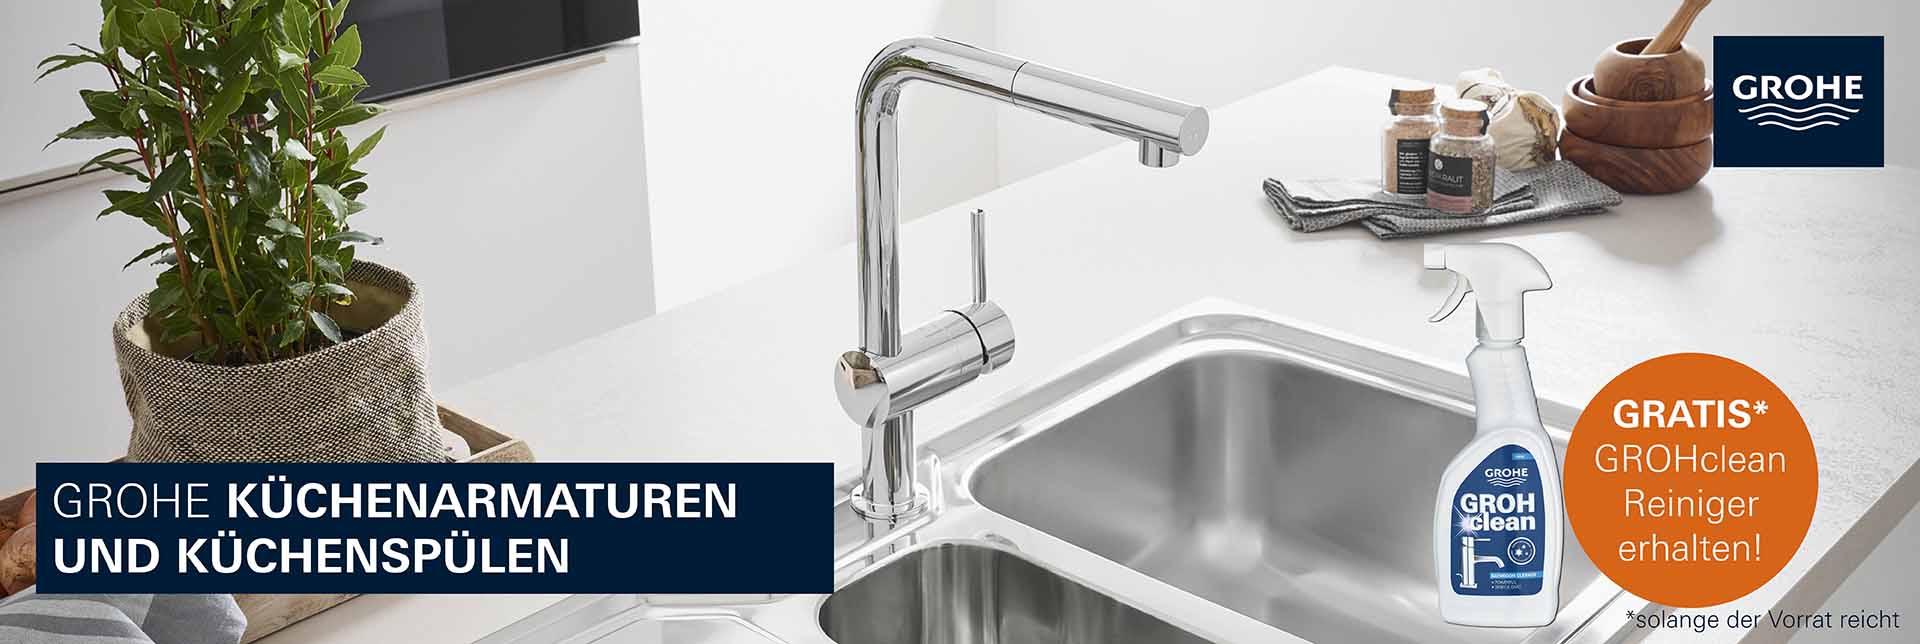 Grohe GrohClean Aktion